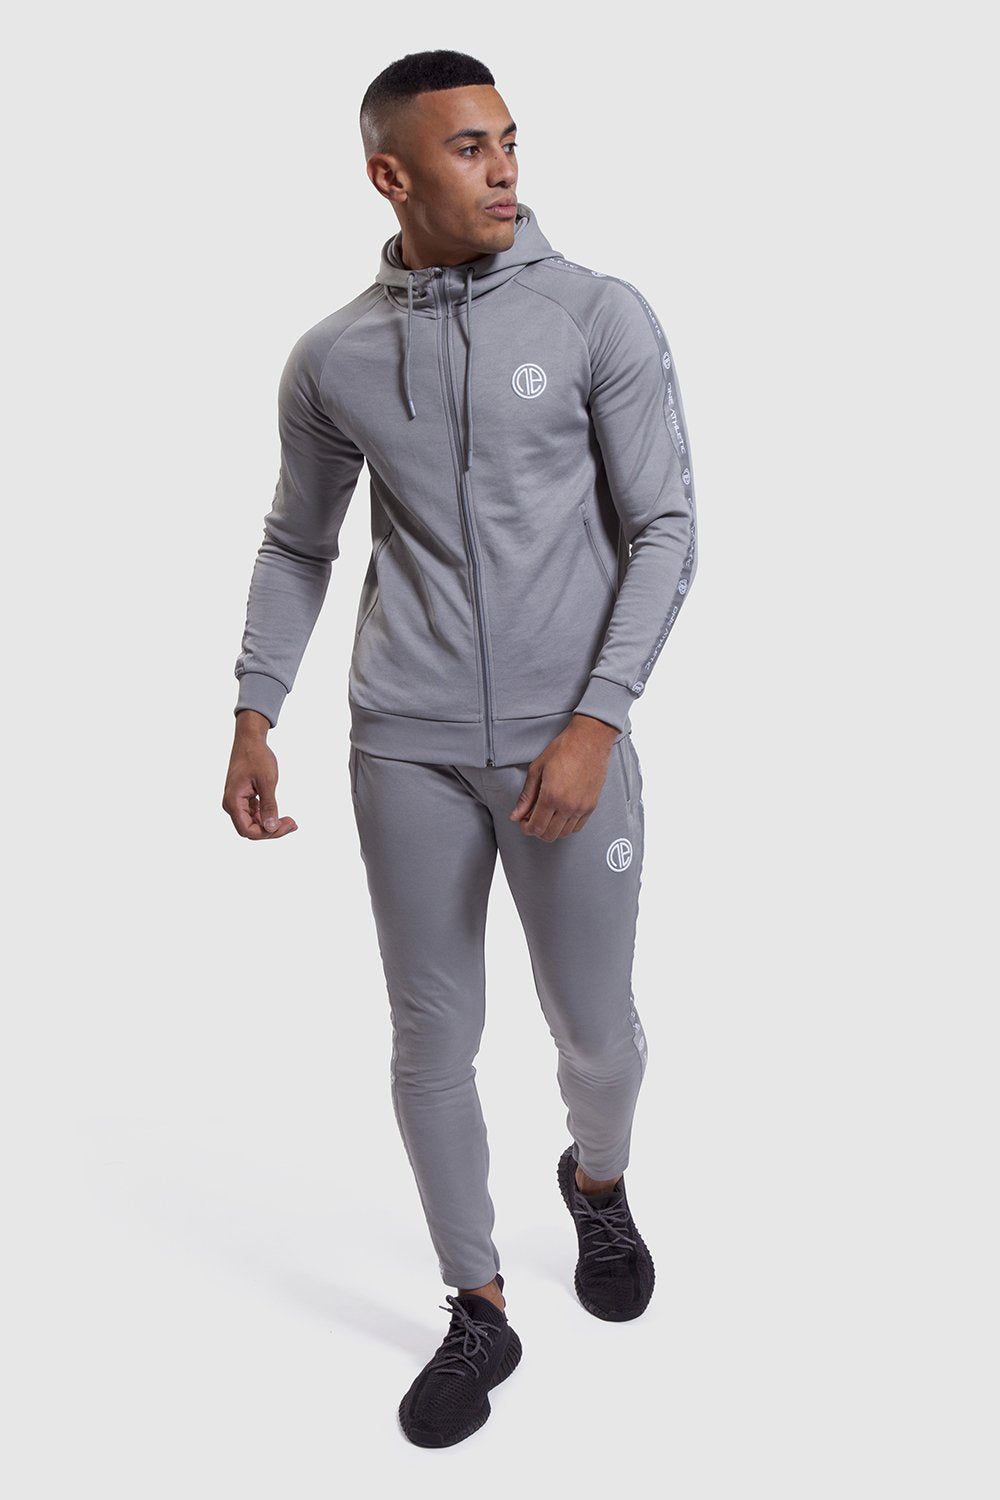 zipped up track top and gym joggers